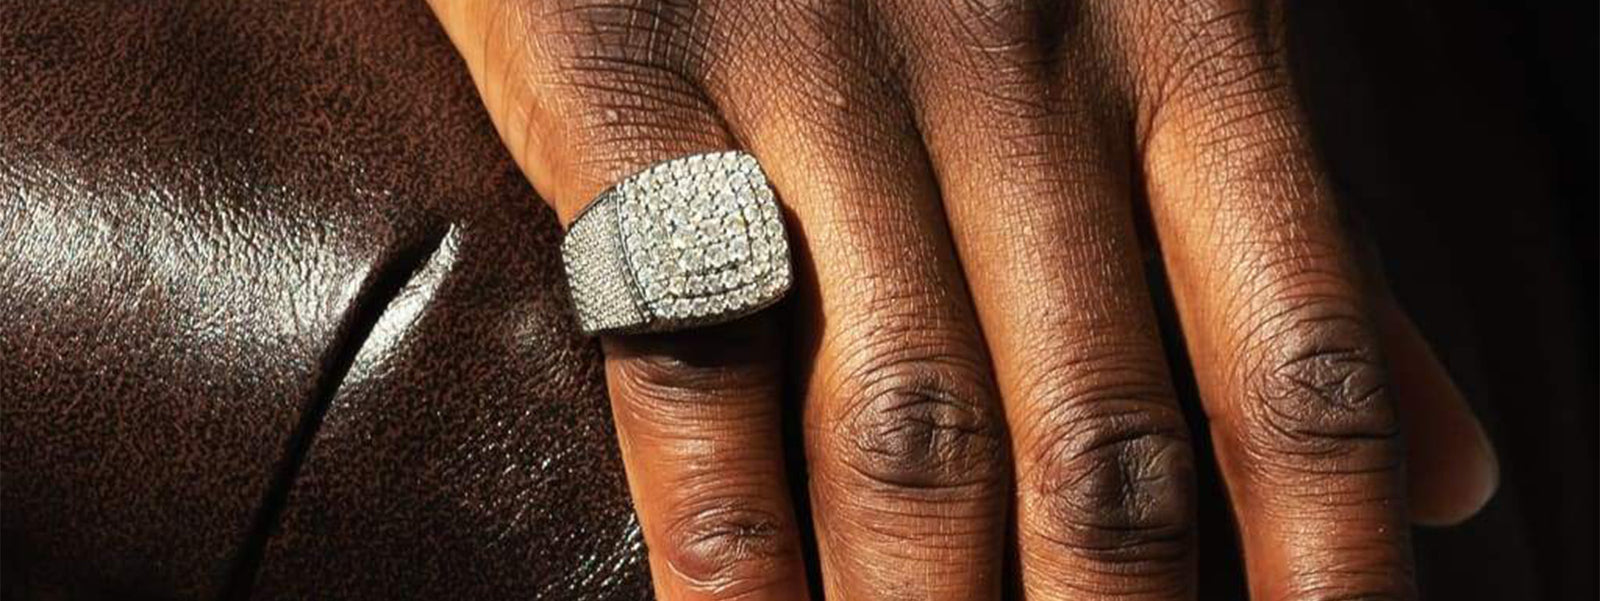 Pinky Rings: Symbolic Jewelry for Both Women and Men